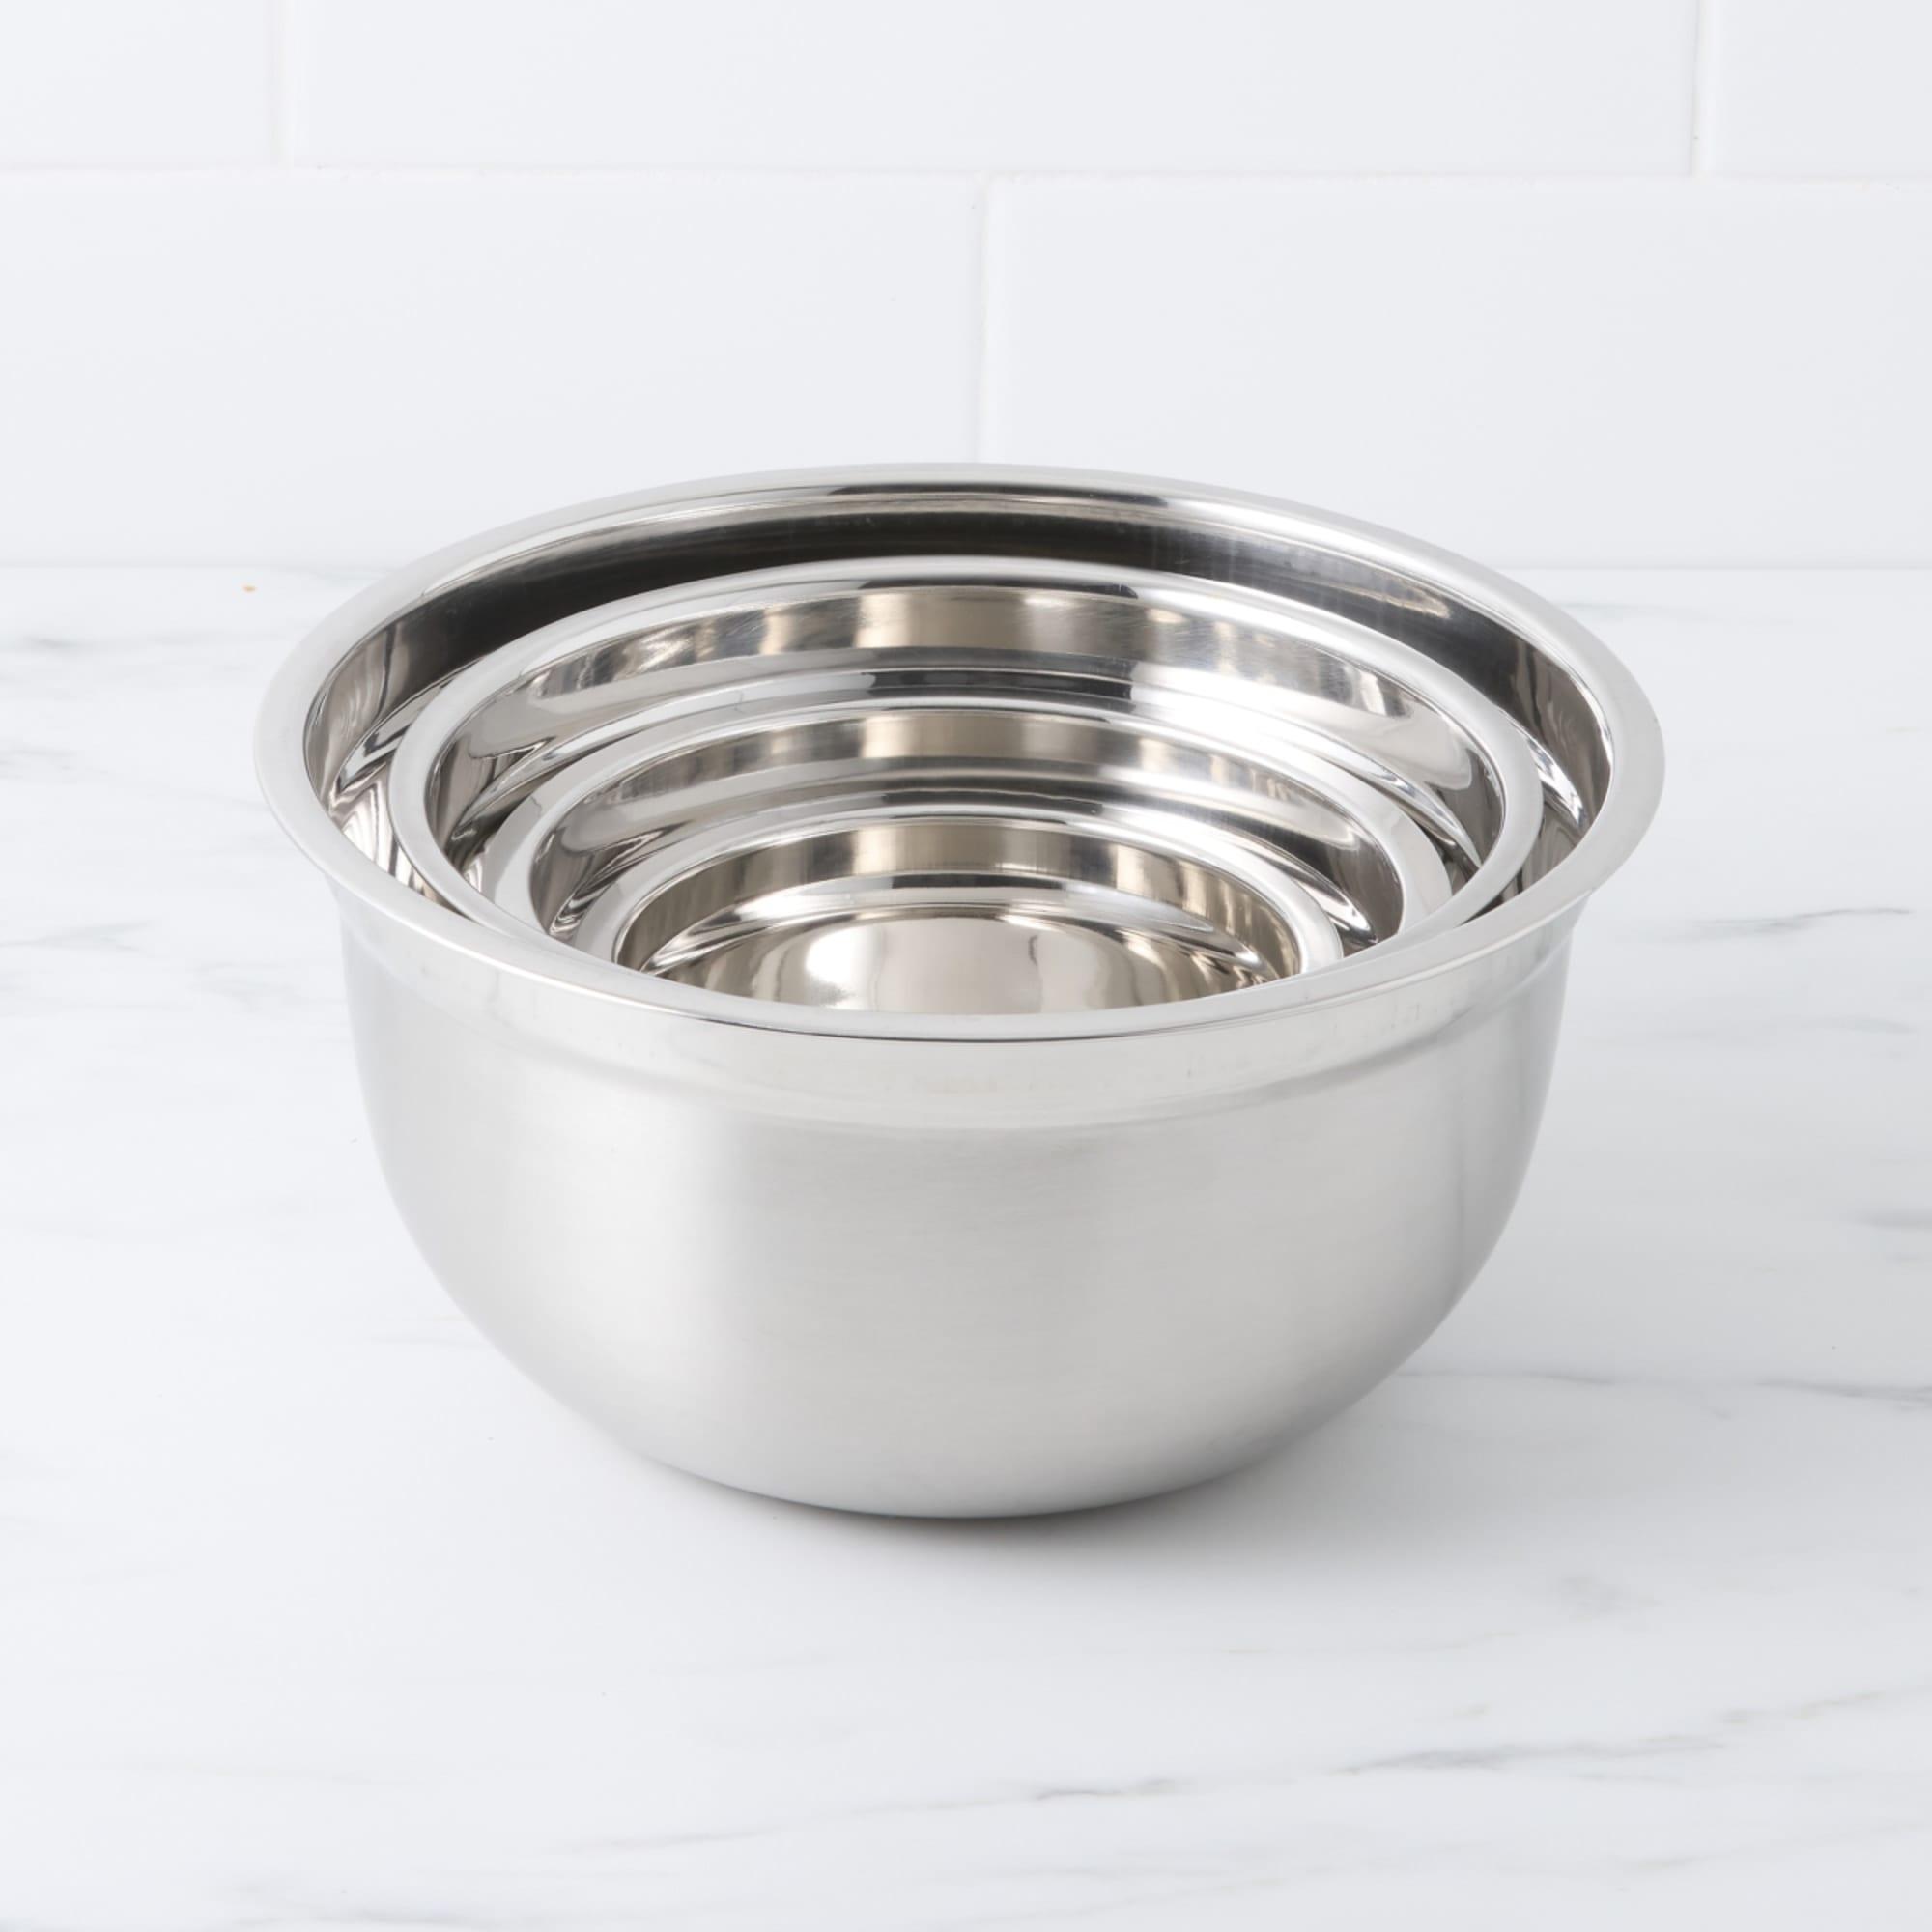 Kitchen Pro Mixwell Stainless Steel German Mixing Bowl 22cm - 3L Image 5